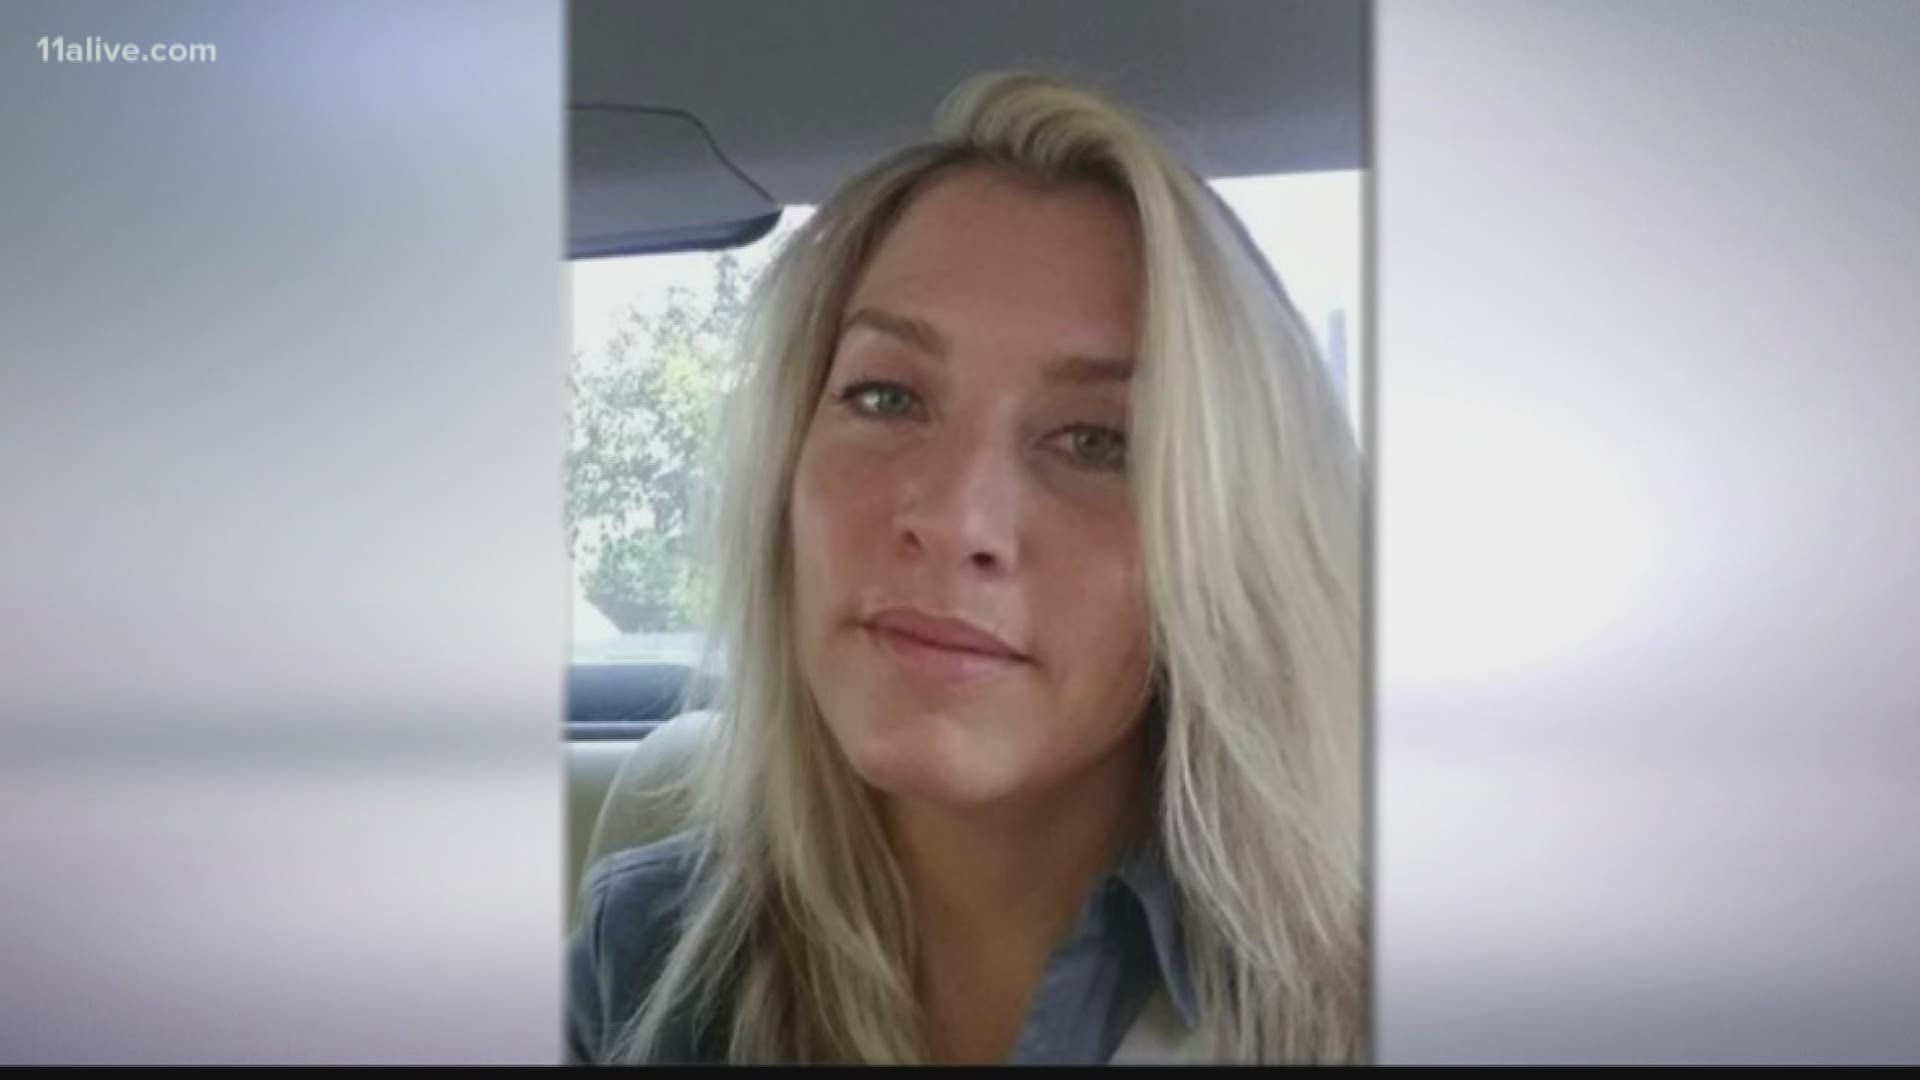 Authorities in Athens confirmed Thursday a missing woman who disappeared after the game between the Georgia Bulldogs and Missouri has been found unharmed.